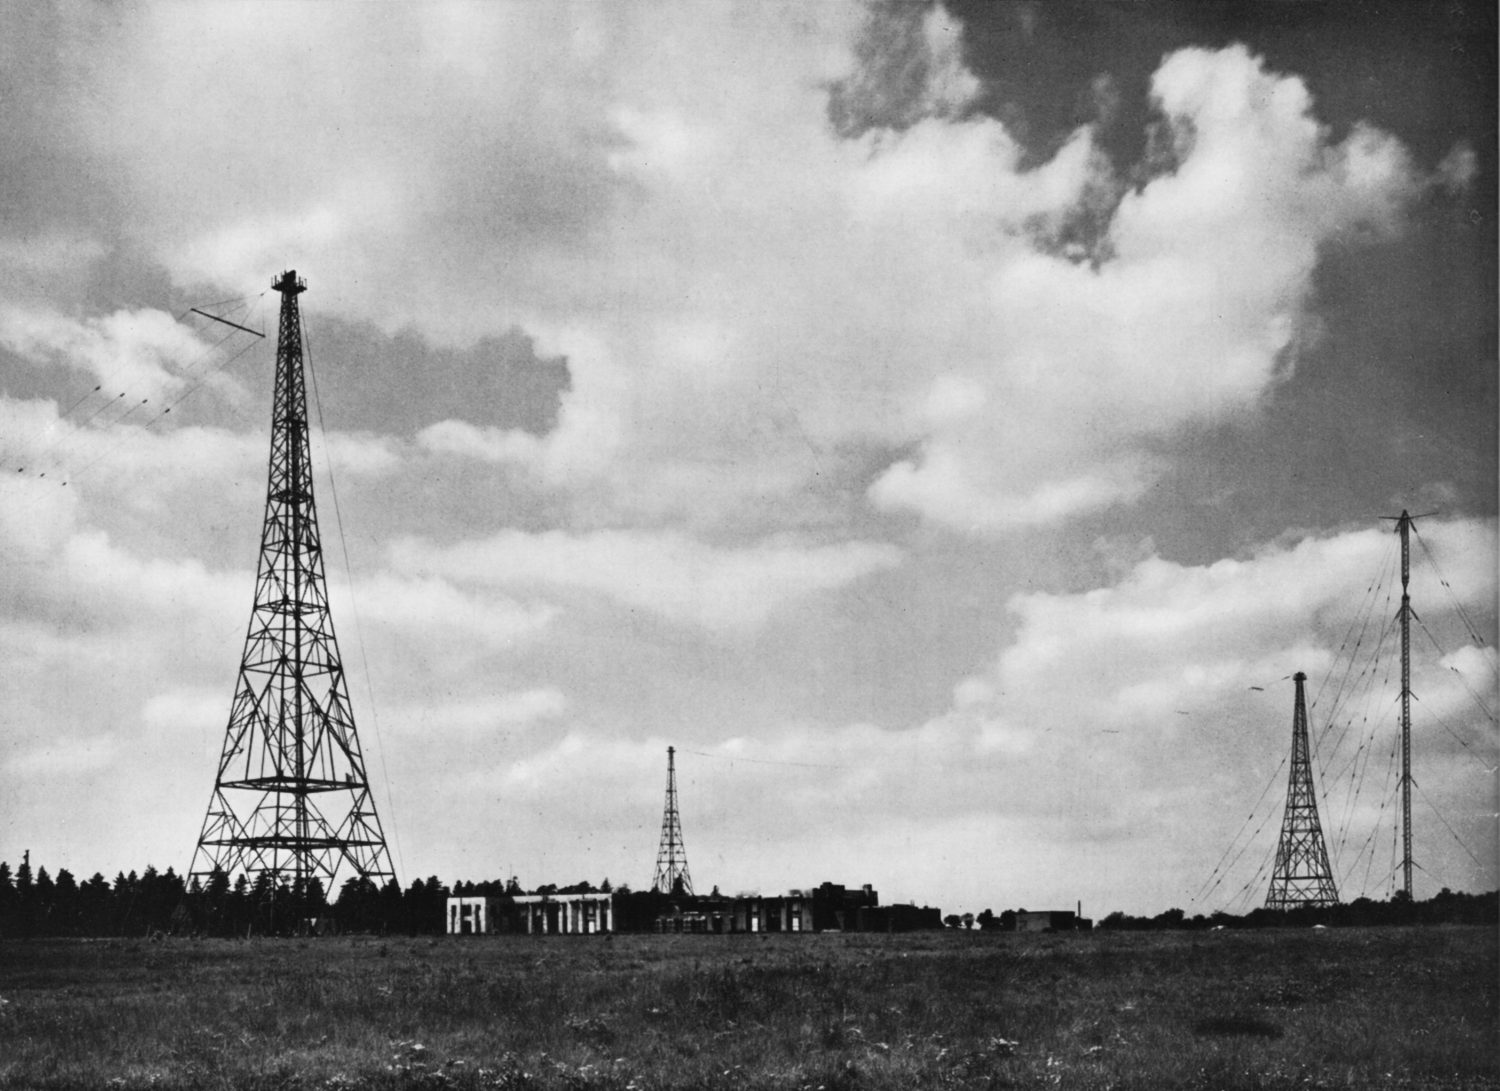 Four transmitter towers